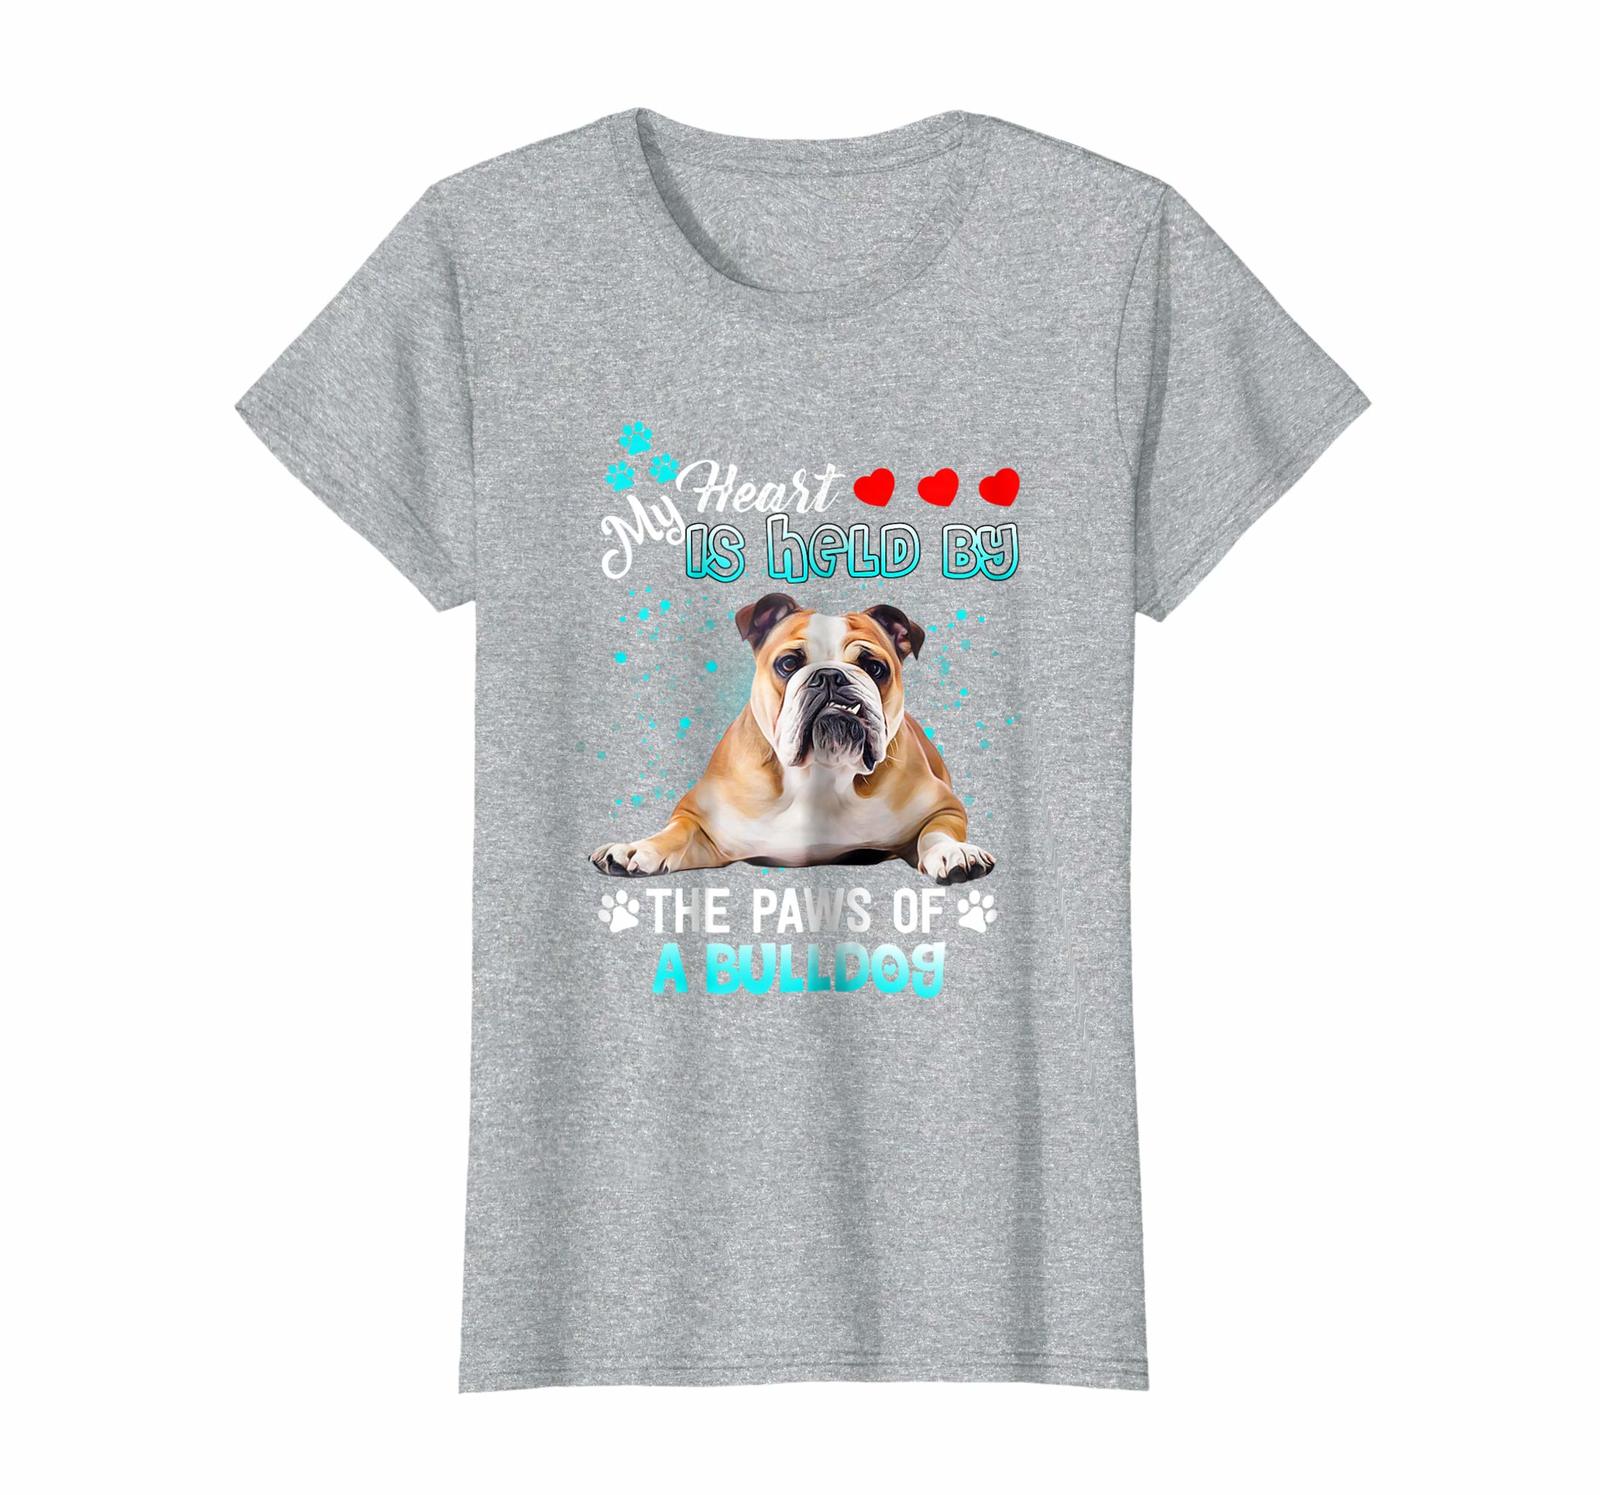 Dog Fashion - My heart is held by the paws of a Bulldog Wowen